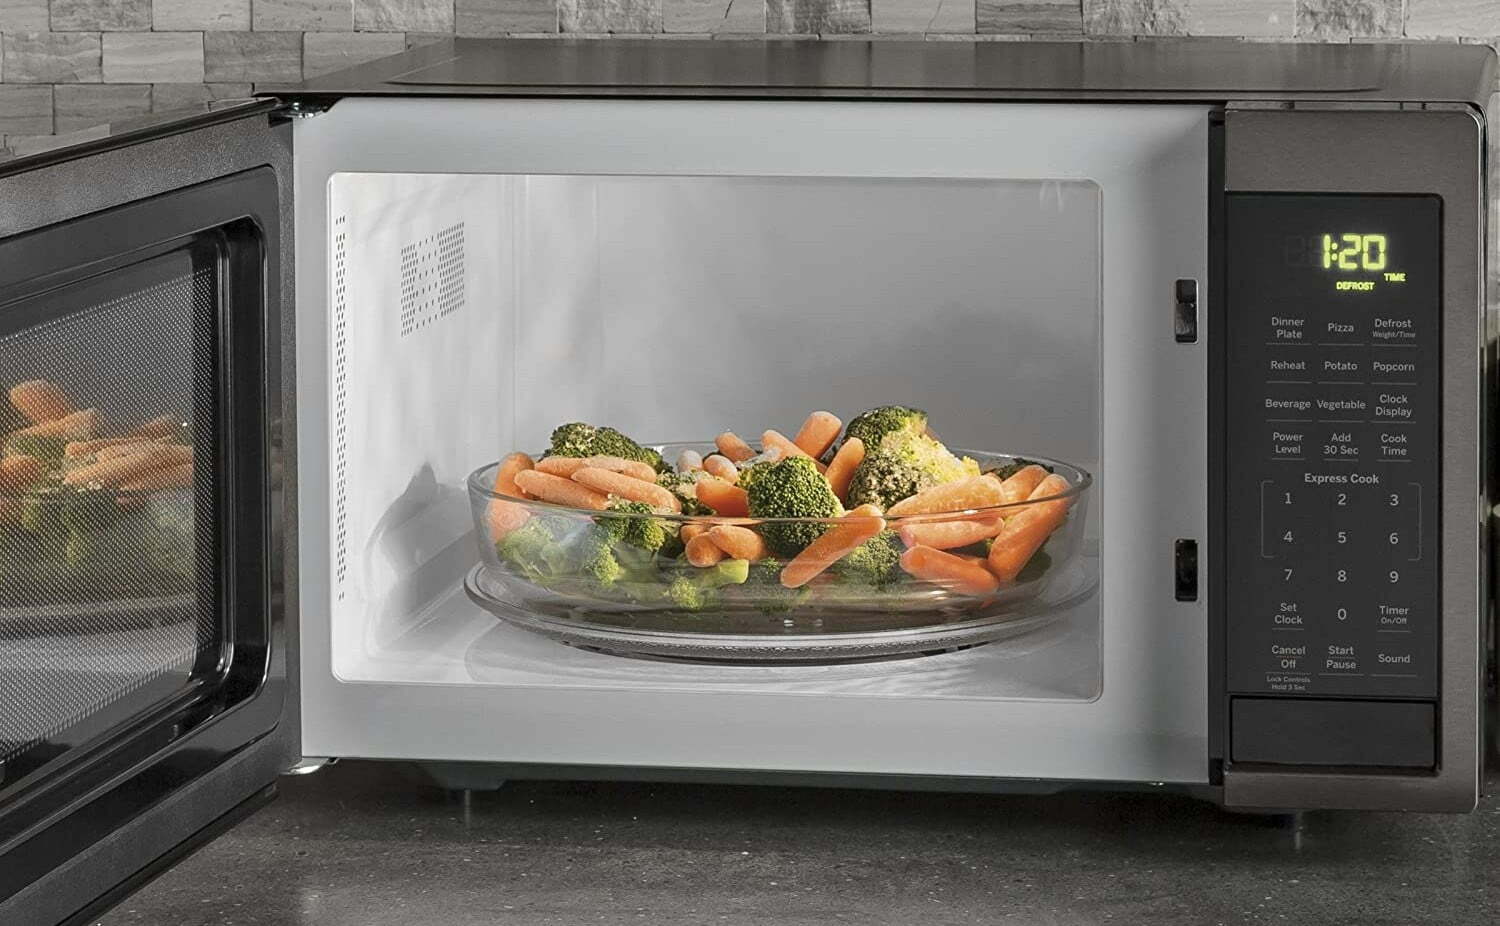 What Happens When You Put Foil in the Microwave?